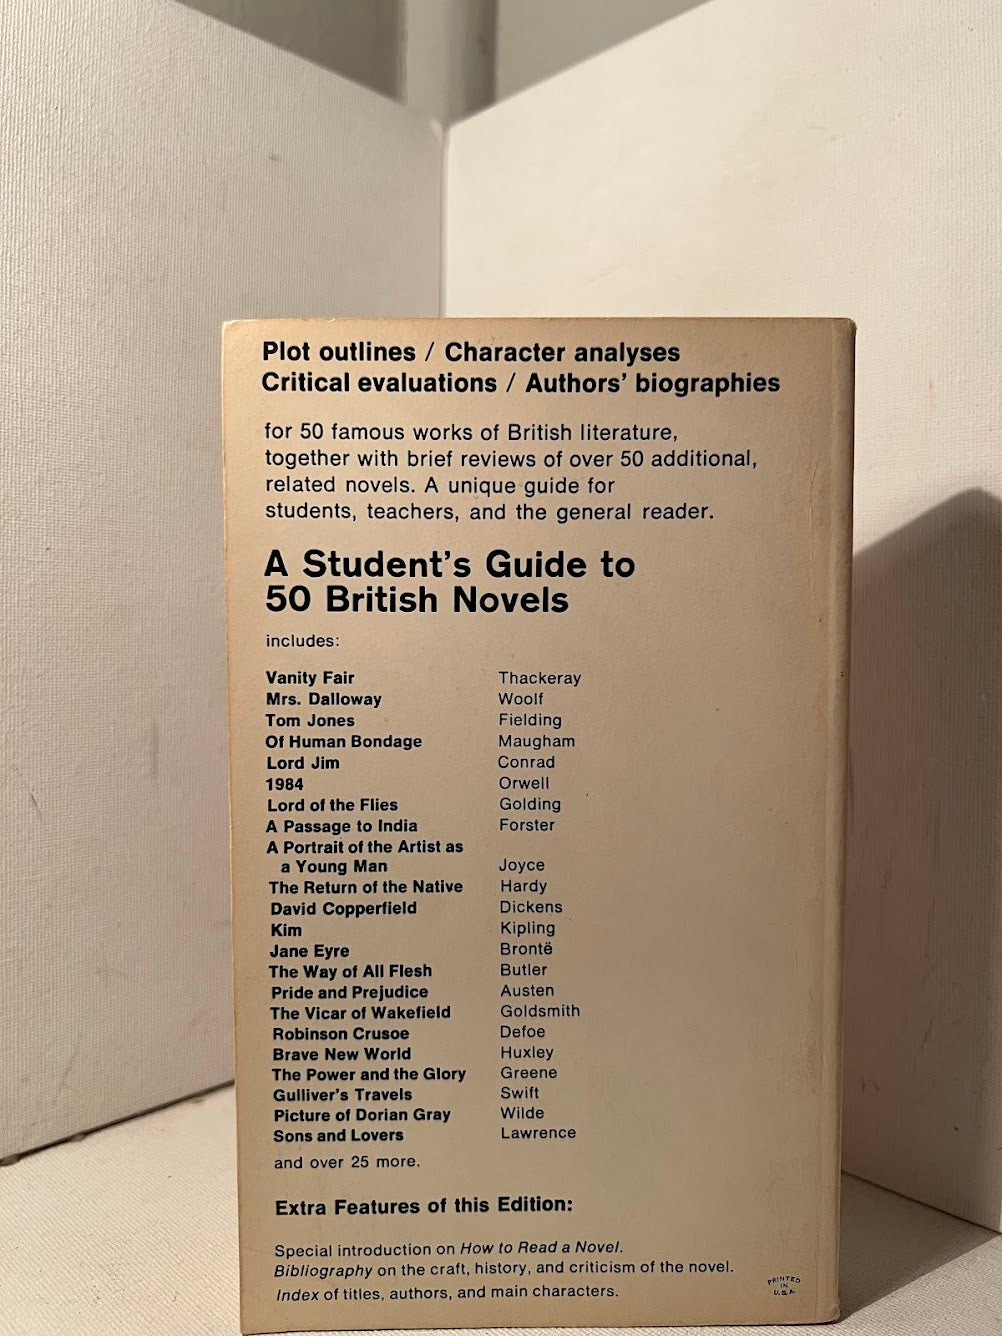 A Student's Guide to 50 British Novels edited by Abraham Lass